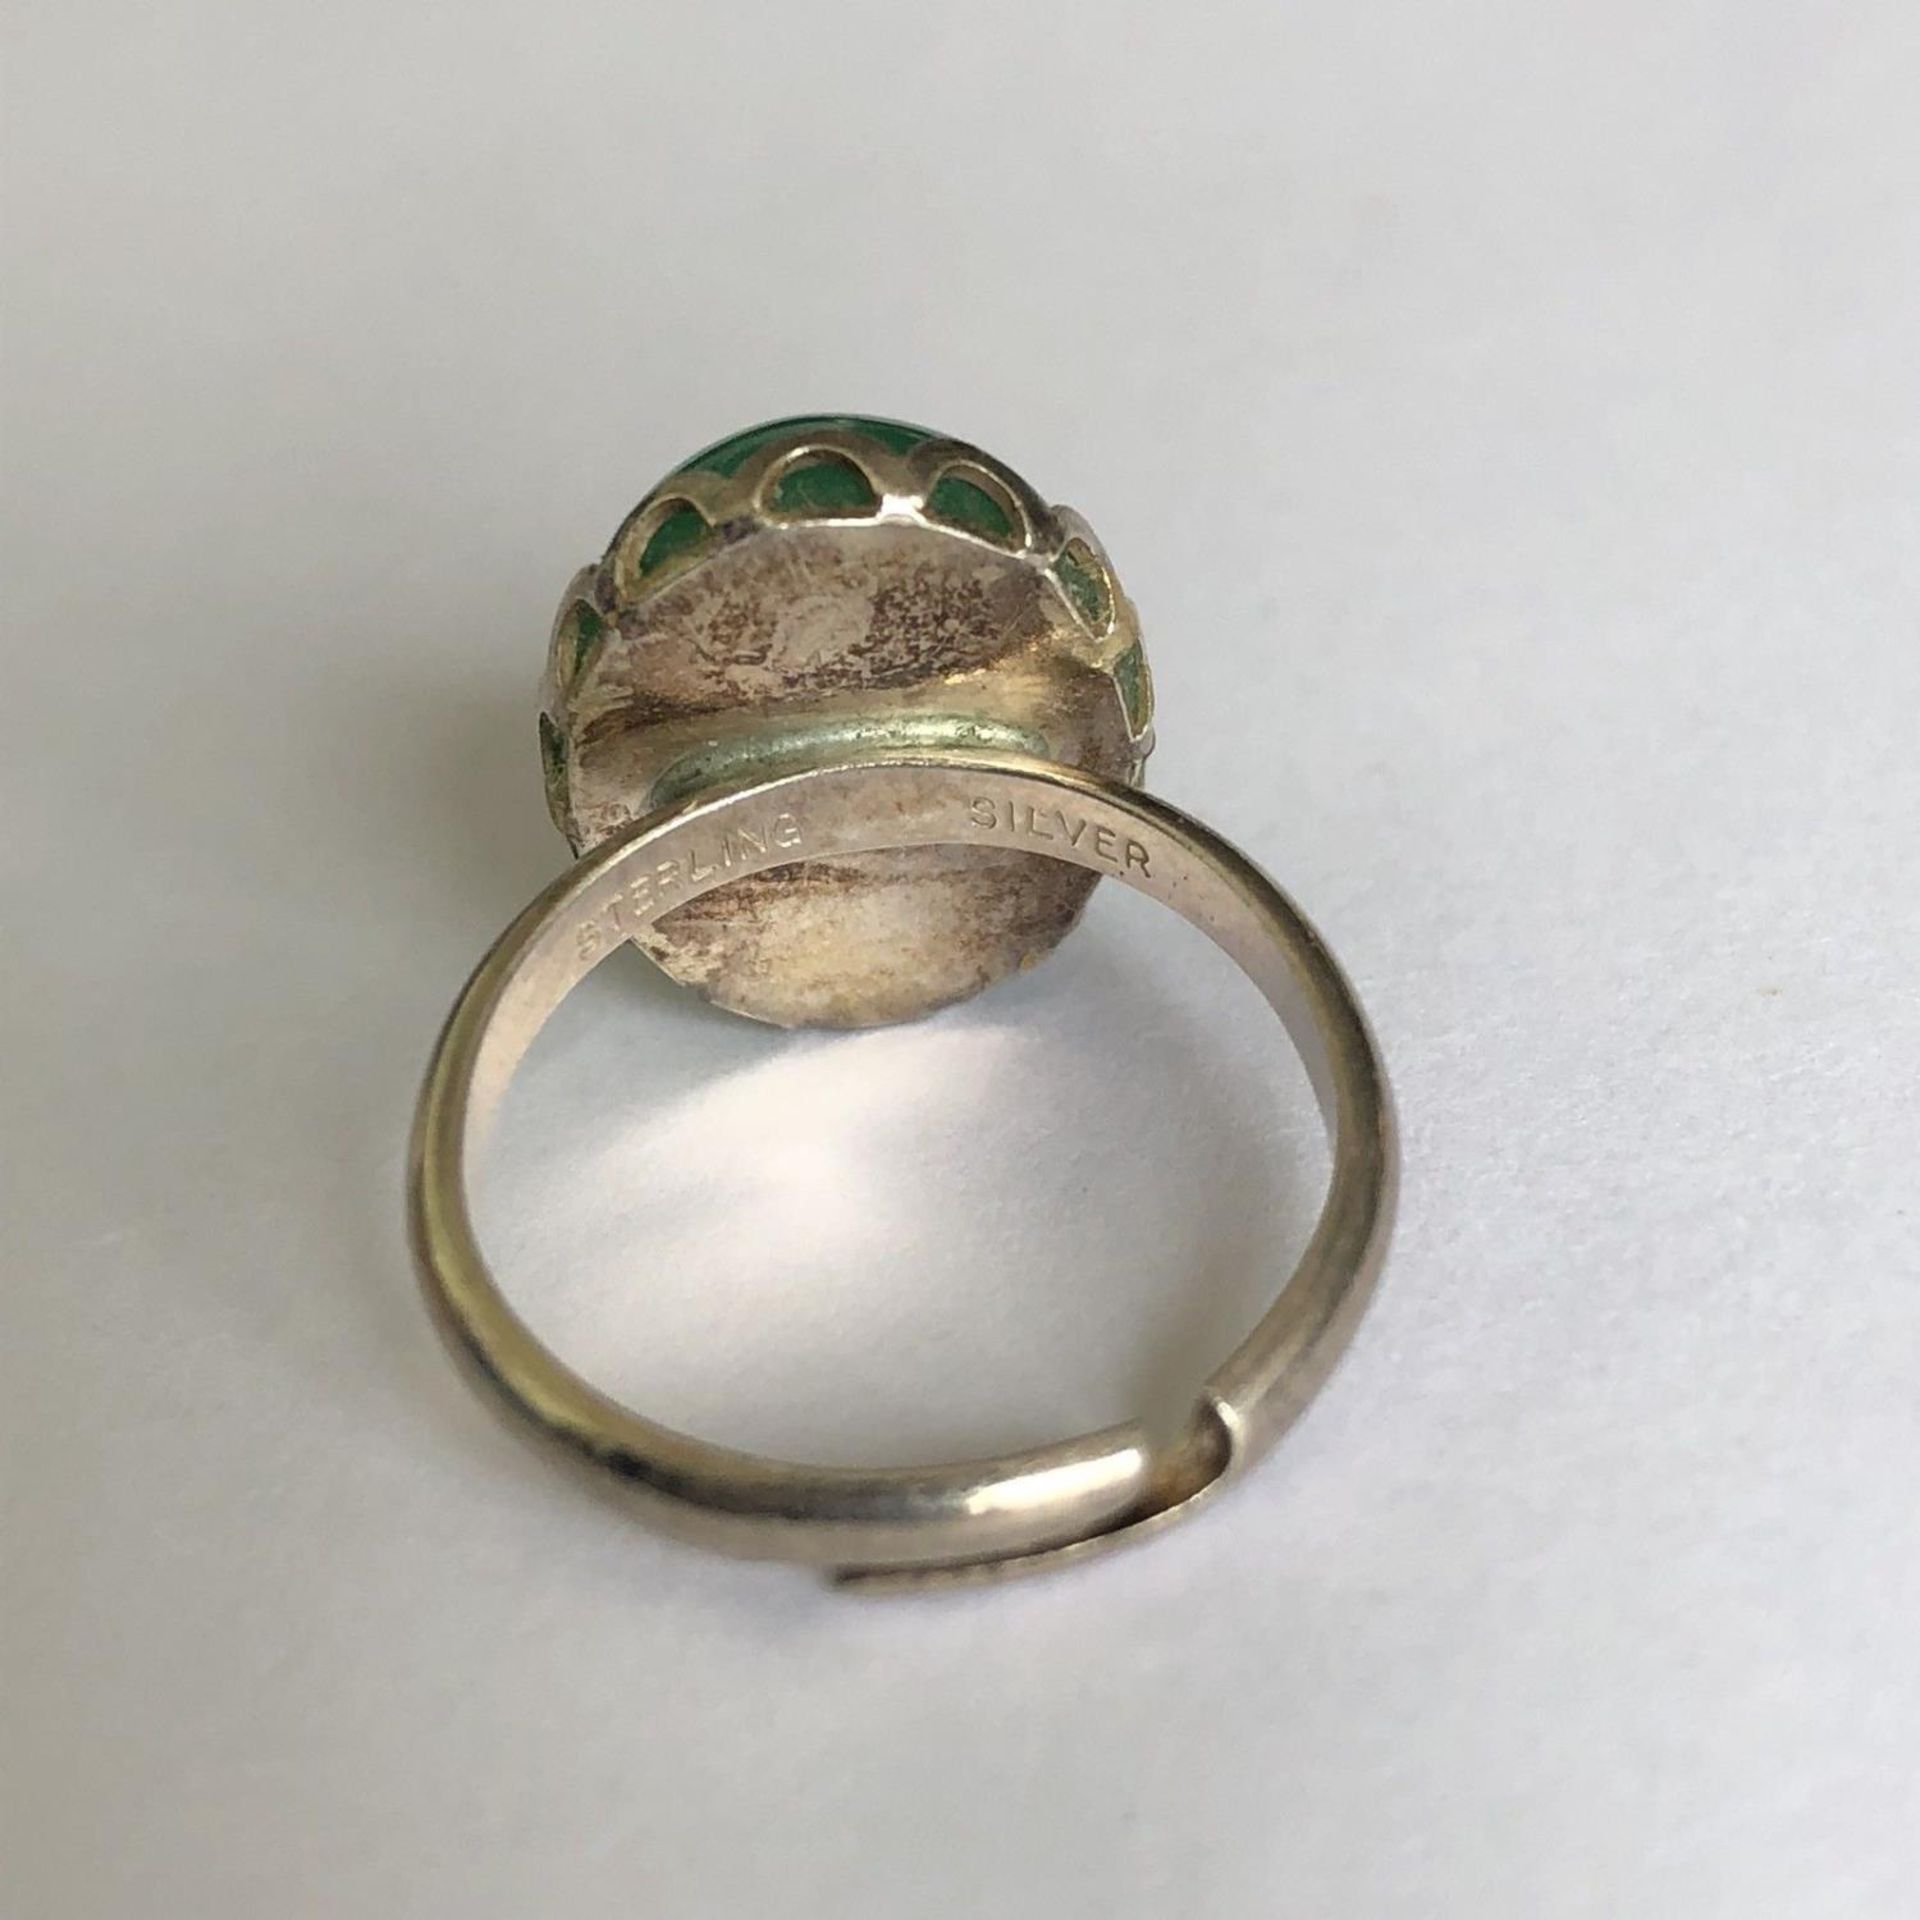 Vintage Silver adjustable ring set with polished green cabochon stone - Image 2 of 2